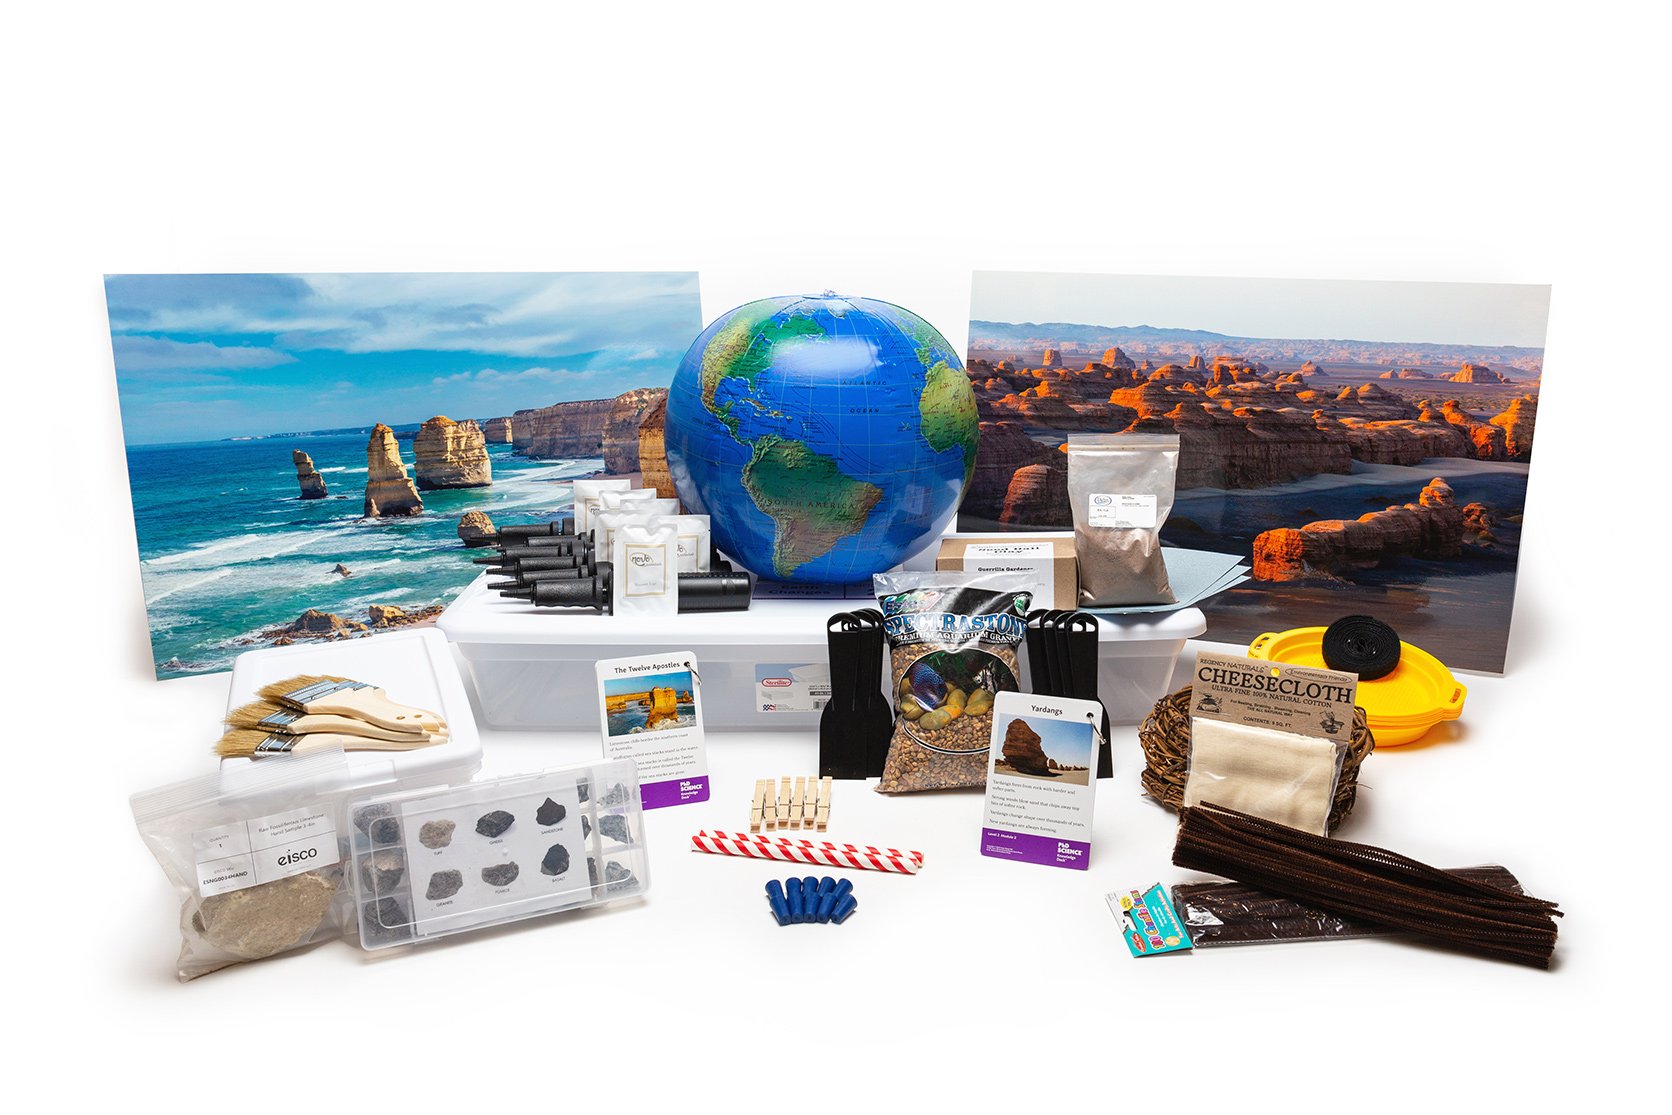 PhD Science hands-on materials kit from Level 2 Module 2 that includes an inflatable globe, Knowledge Deck cards and posters, and rock samples